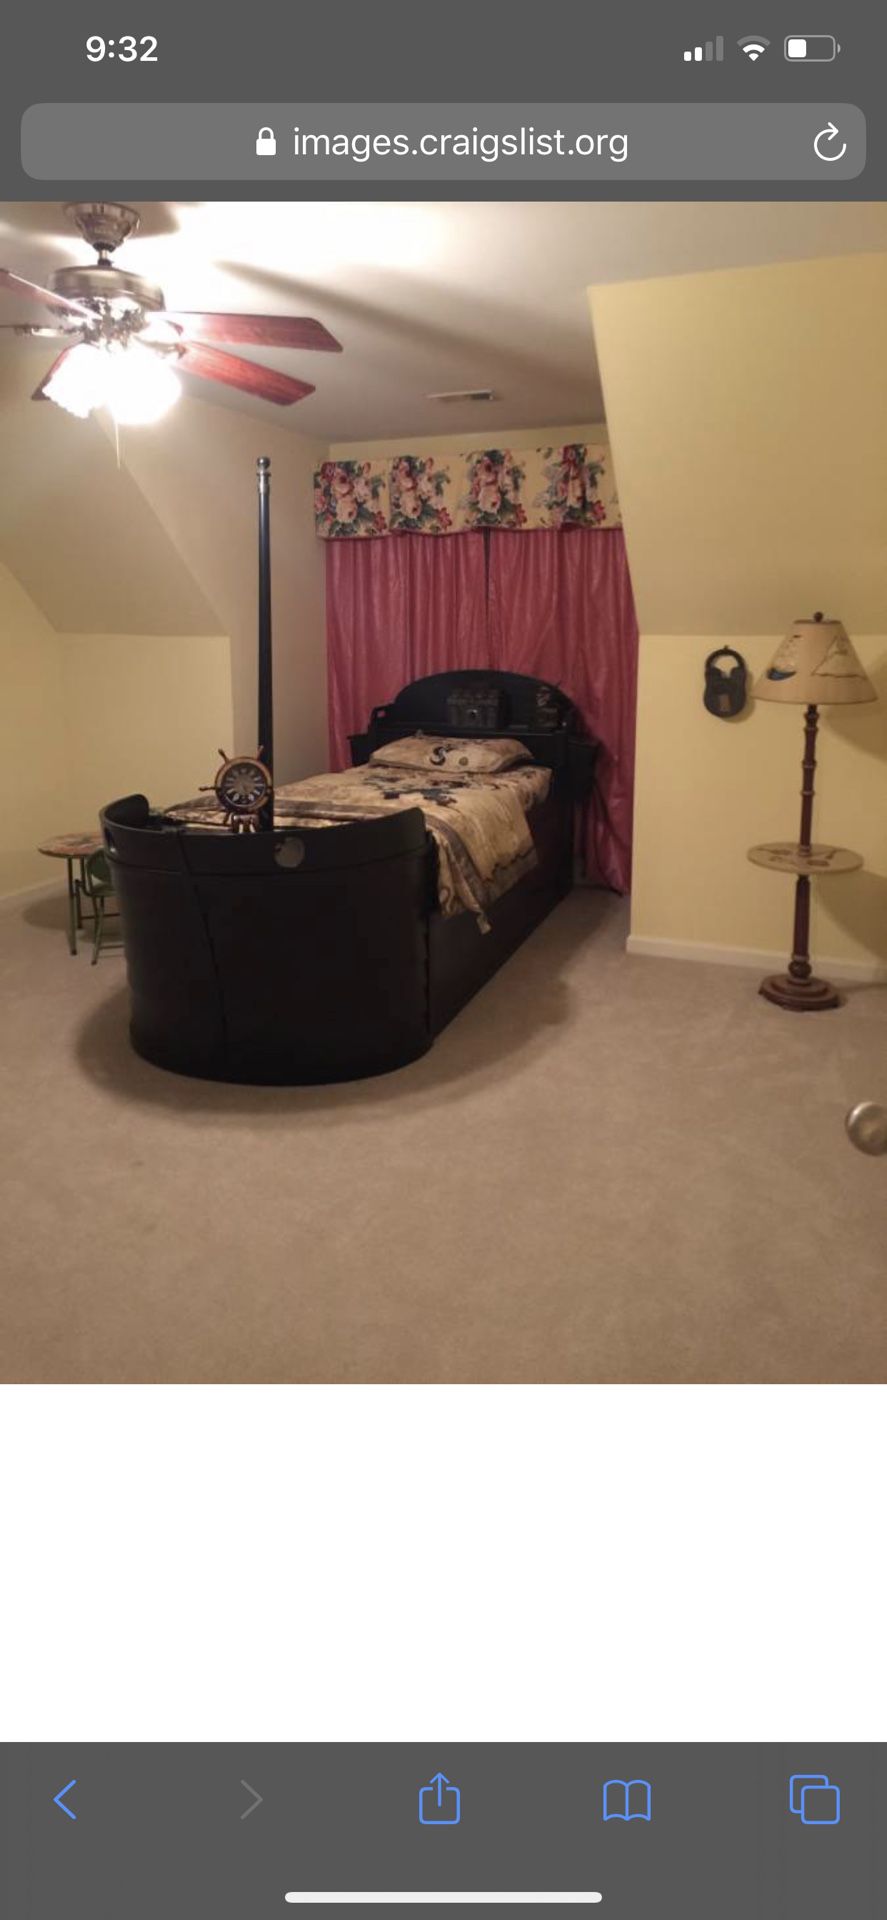 Twin bed with matress